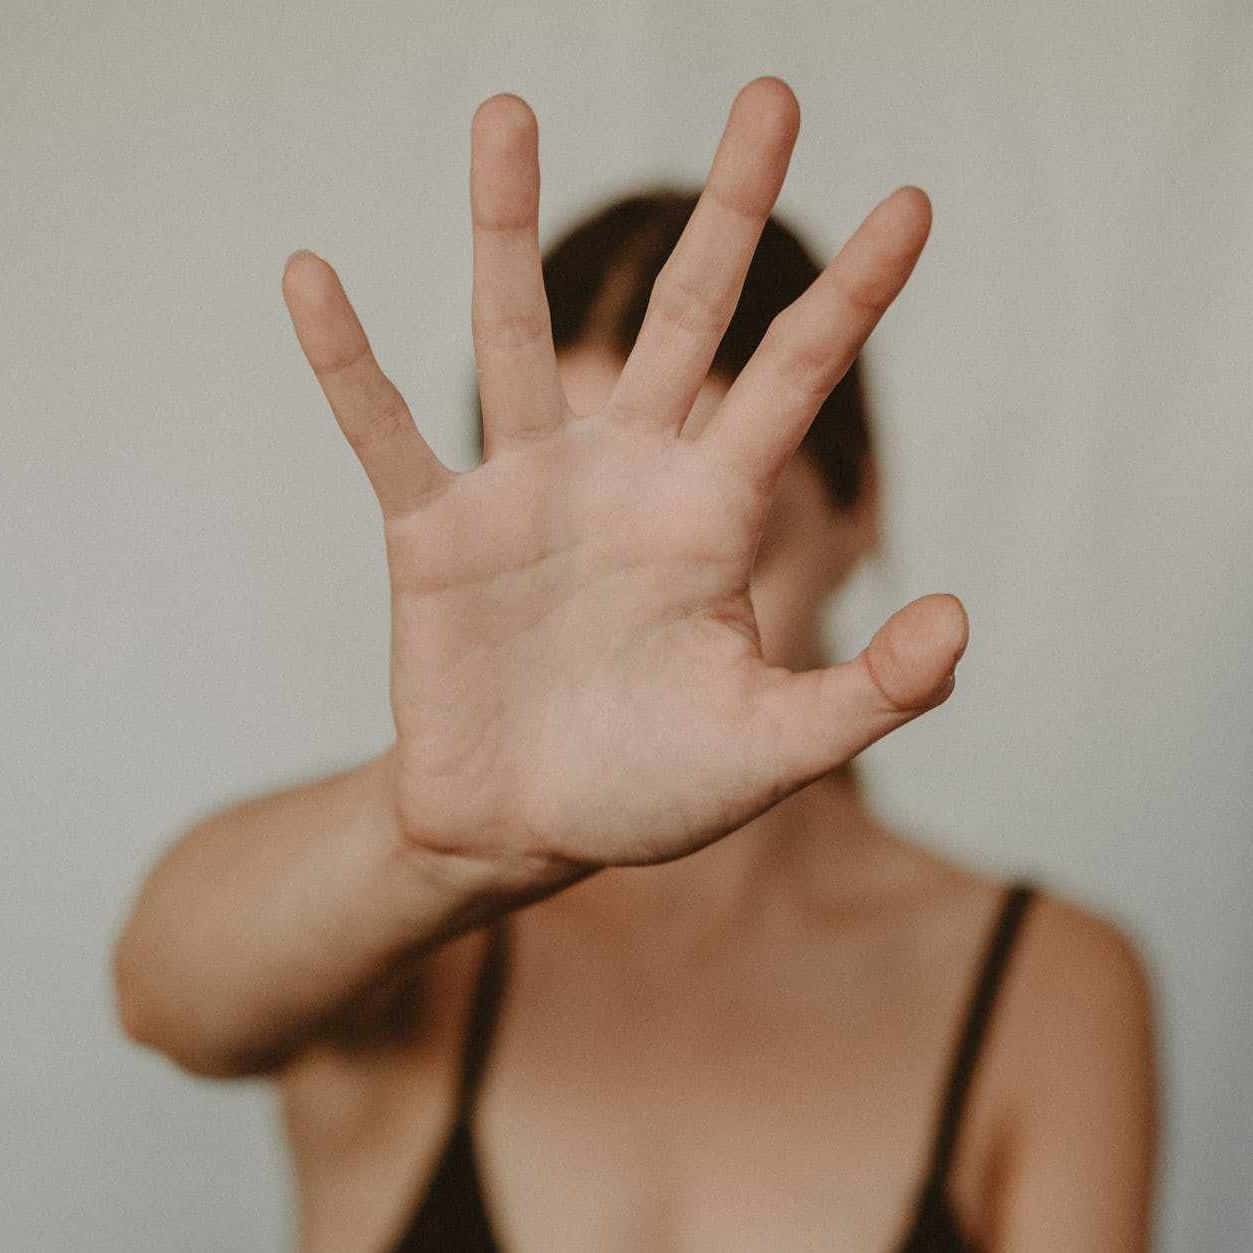 A woman with her hand held out during online counselling